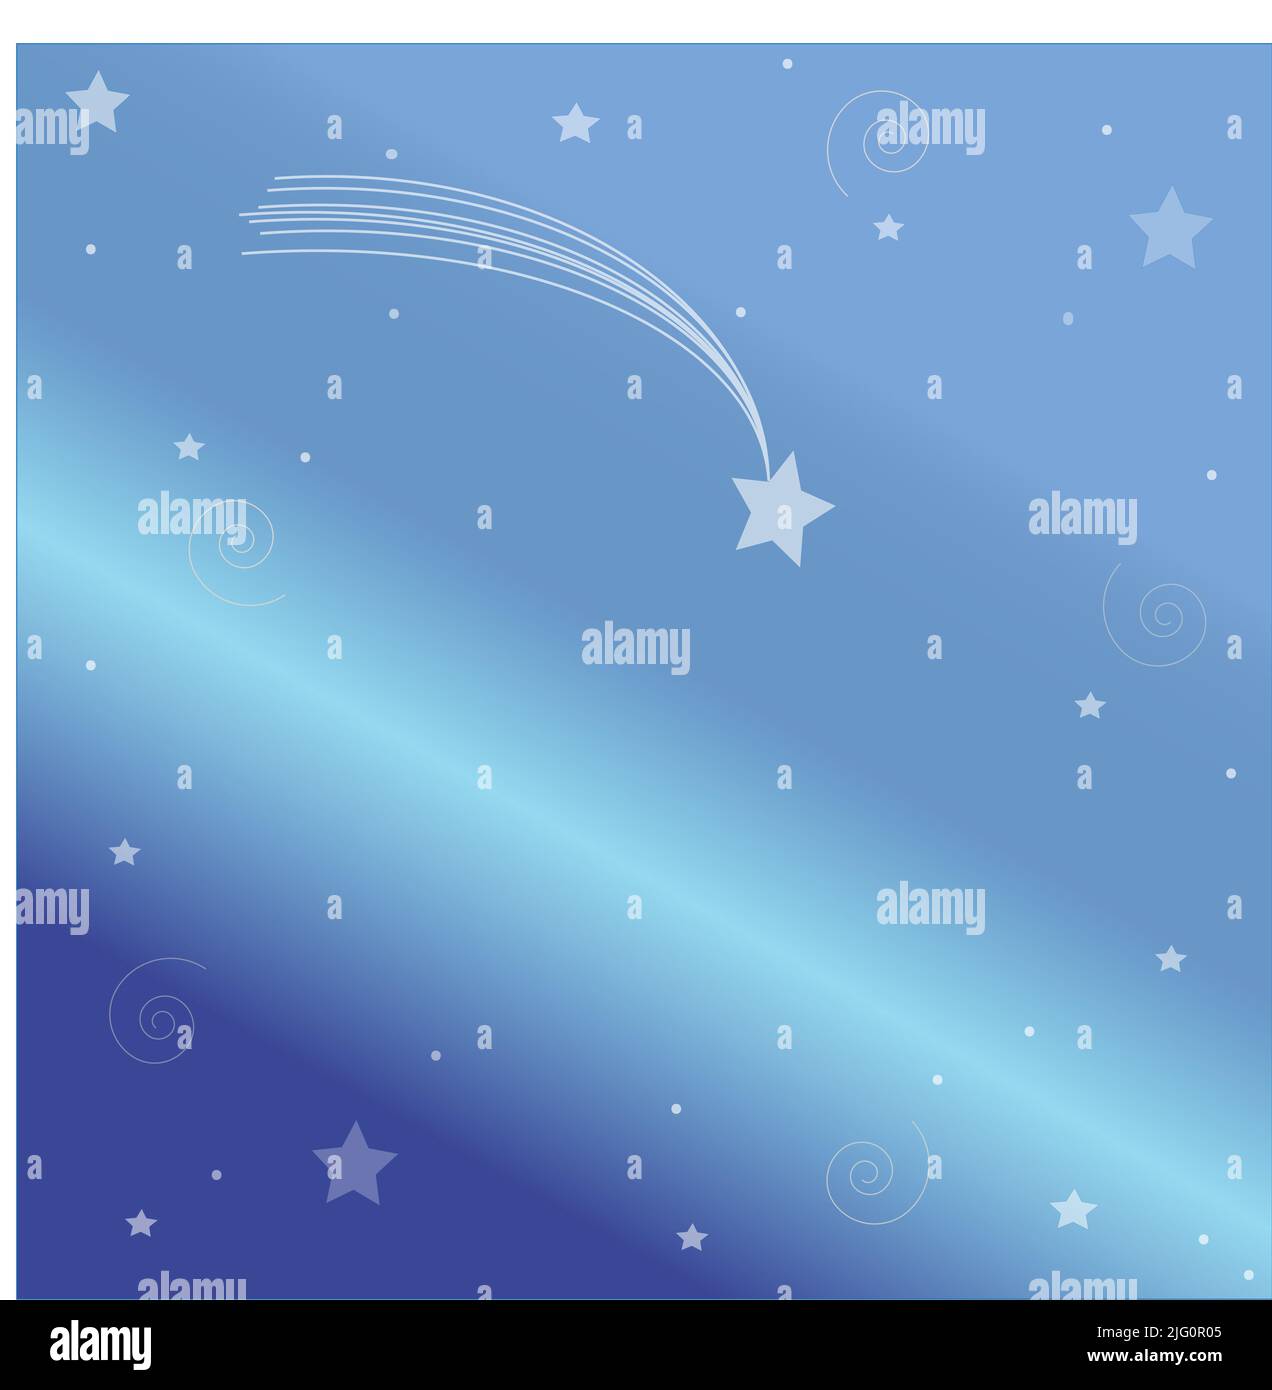 Graphic gradient Blue with stars Background and 2nd image with Christmas Silver and Blue Bells Stock Photo